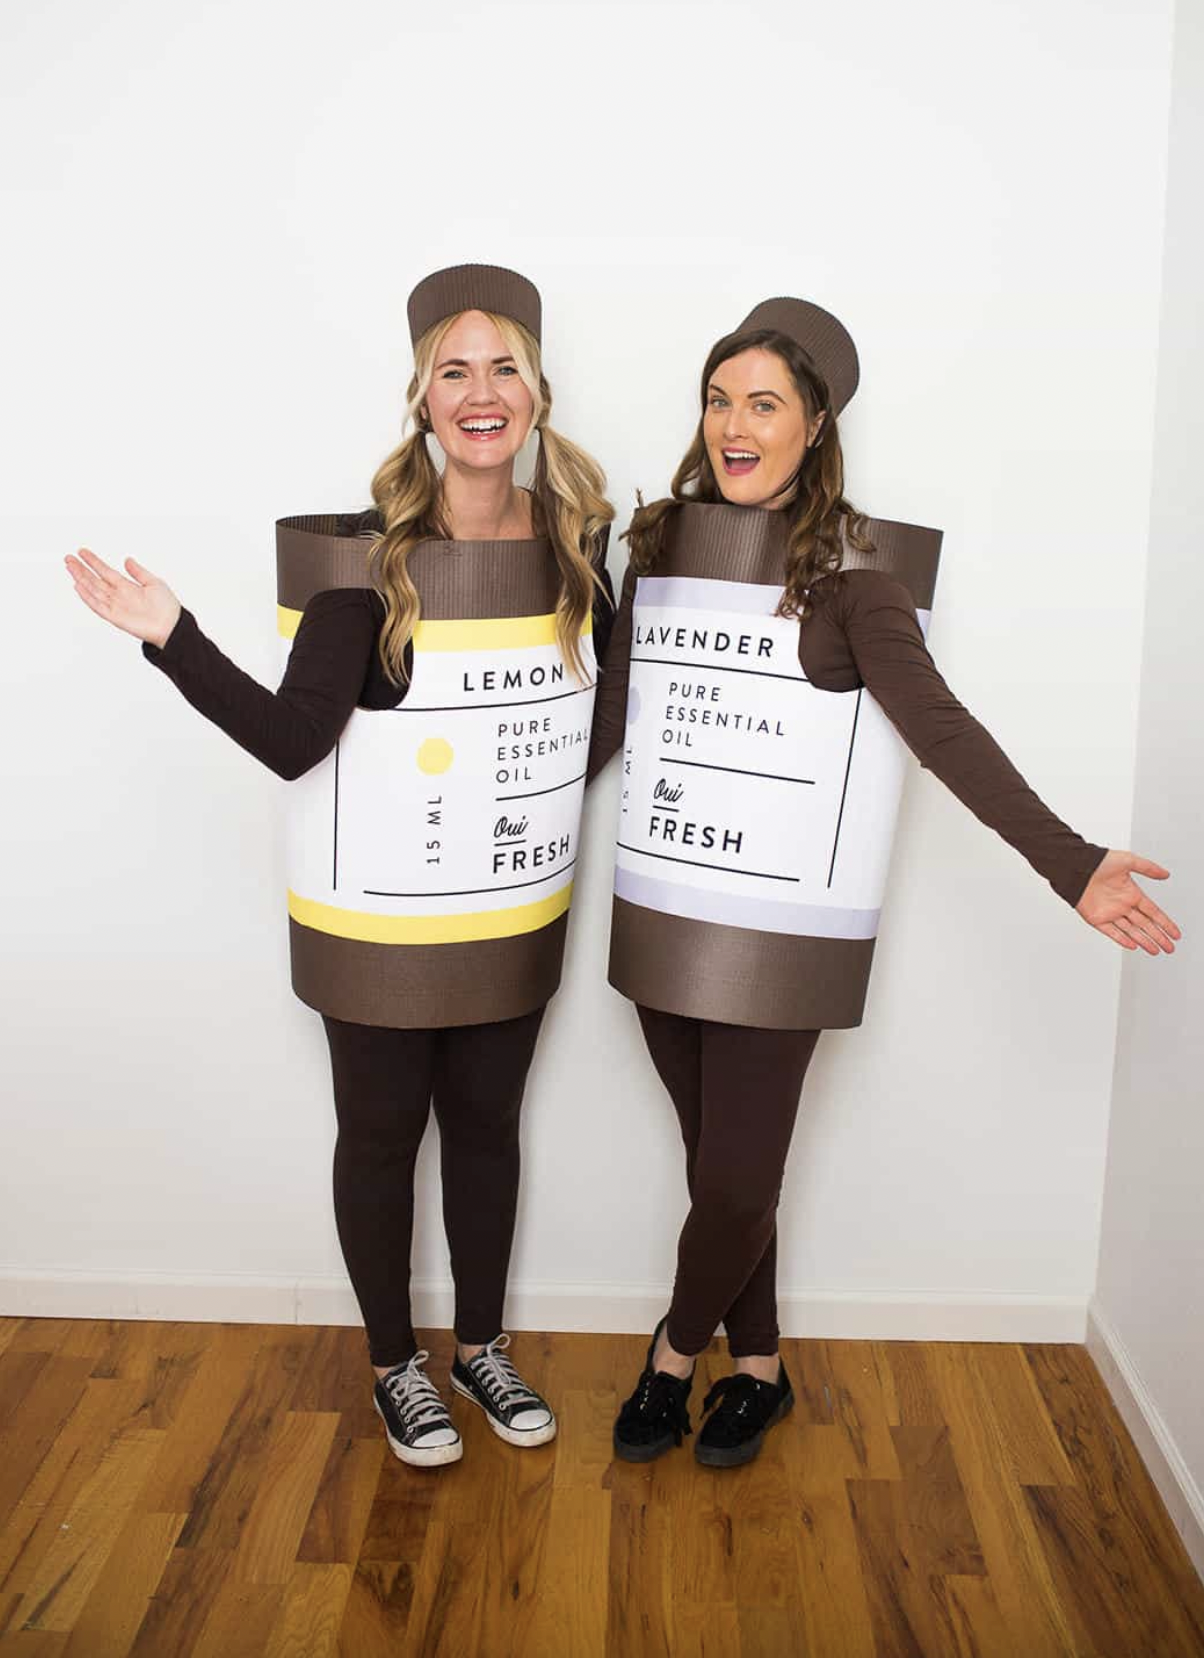 Funny Halloween costumes: Fun ideas for all ages and groups